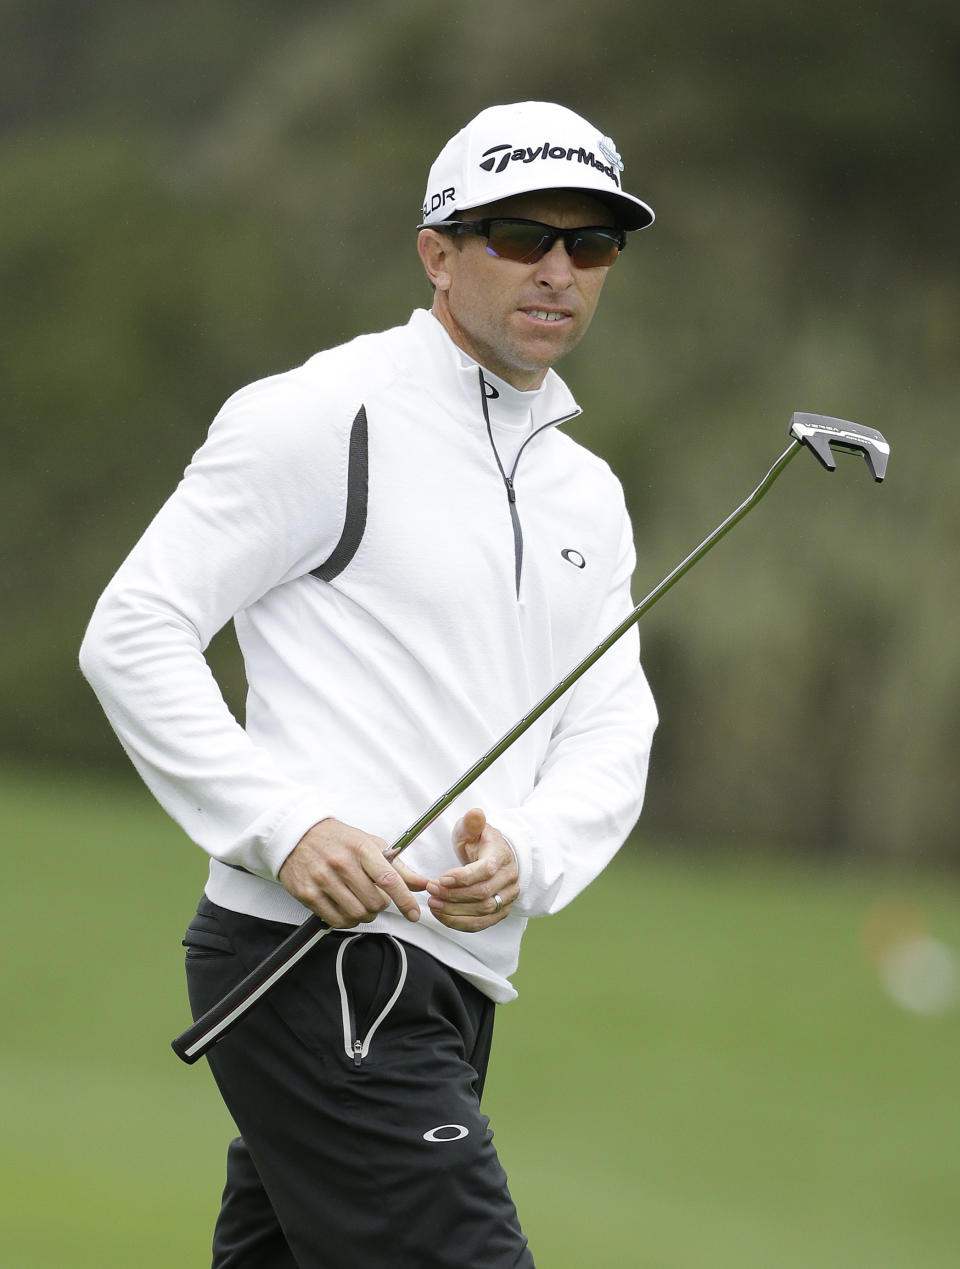 Tim Wilkinson of New Zealand, looks over the third green during the final round of the AT&T Pebble Beach Pro-Am golf tournament, Sunday, Feb. 9, 2014, in Pebble Beach, Calif. (AP Photo/Eric Risberg)